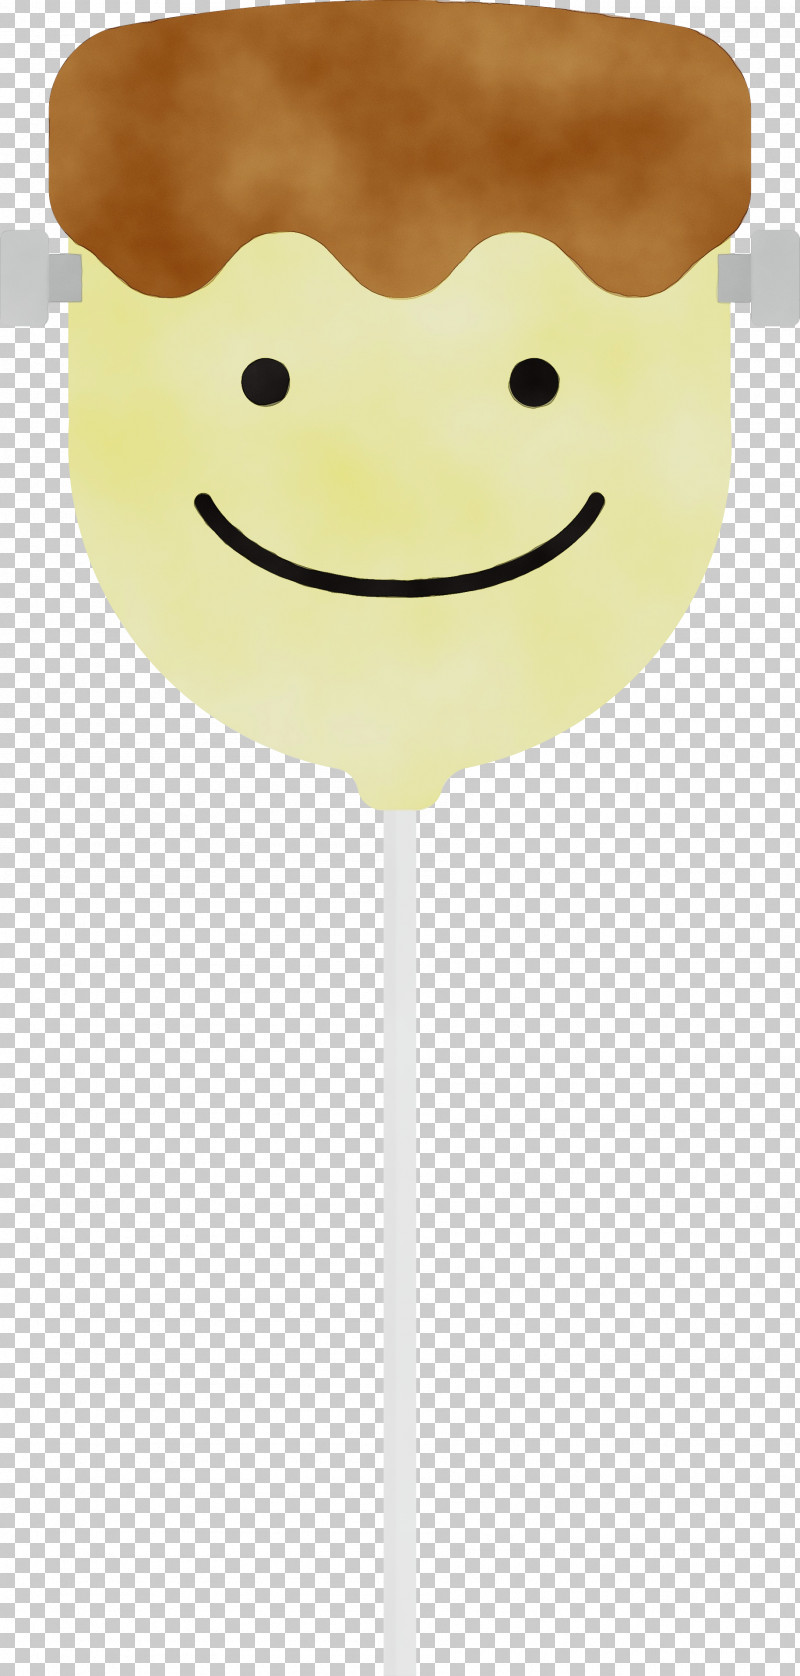 Smiley Yellow Cartoon Science Biology PNG, Clipart, Biology, Cartoon, Halloween, Paint, Science Free PNG Download